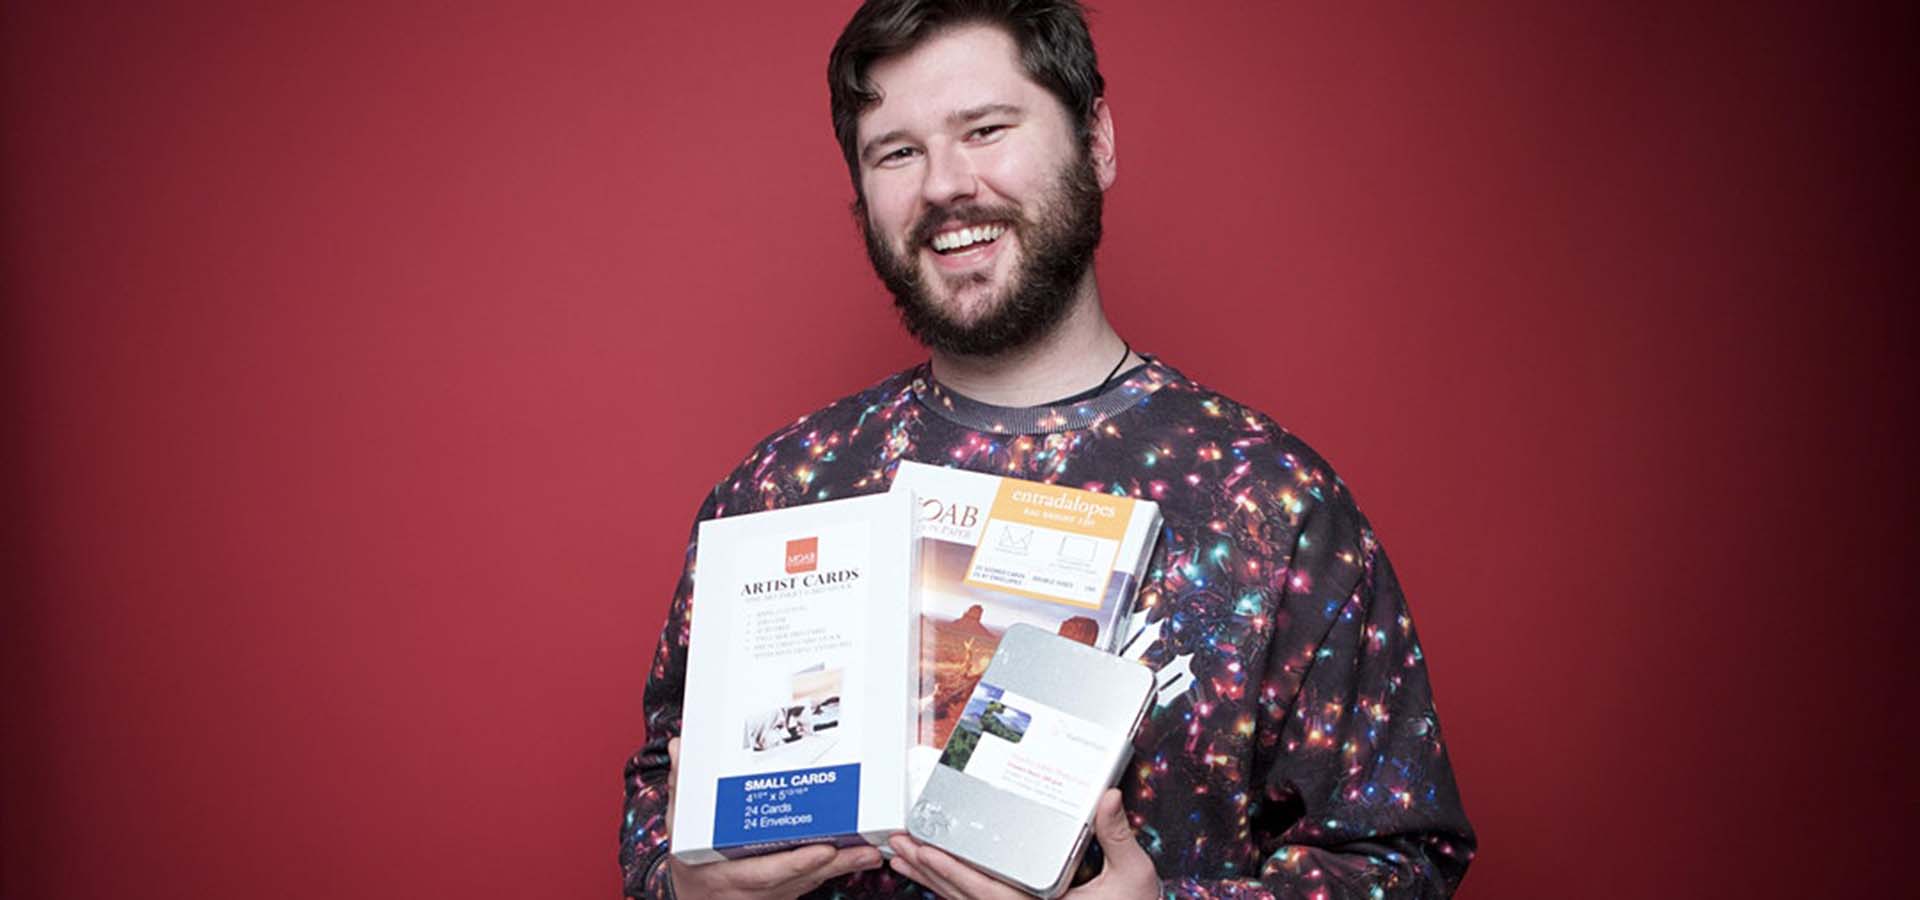 Man with ugly Christmas sweater on holding up photography books.